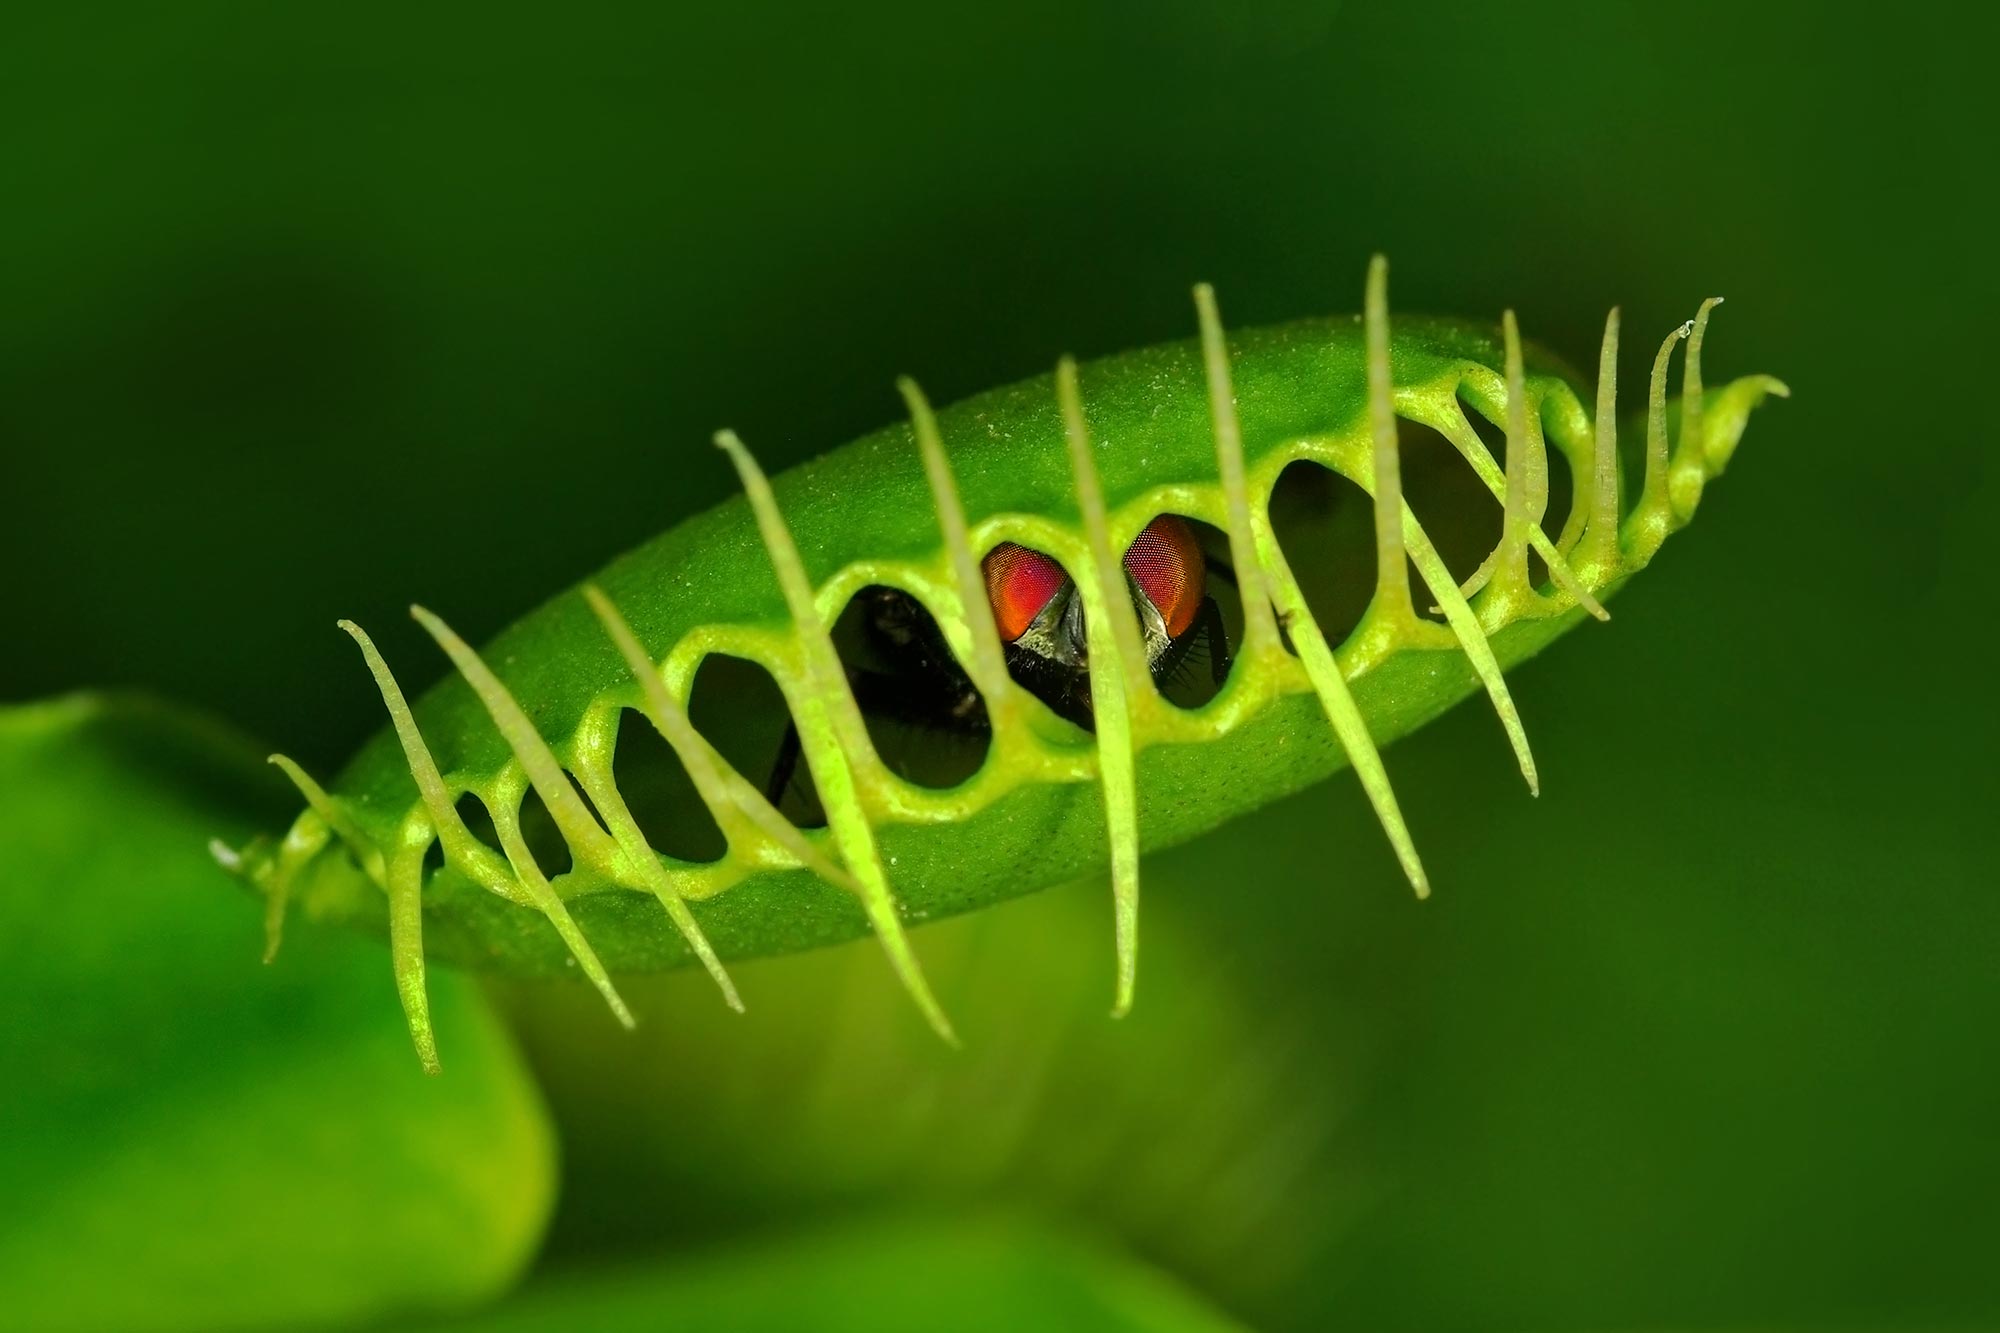 Venus-Flytrap-Dionaea-muscipula-with-Trapped-Fly.jpg